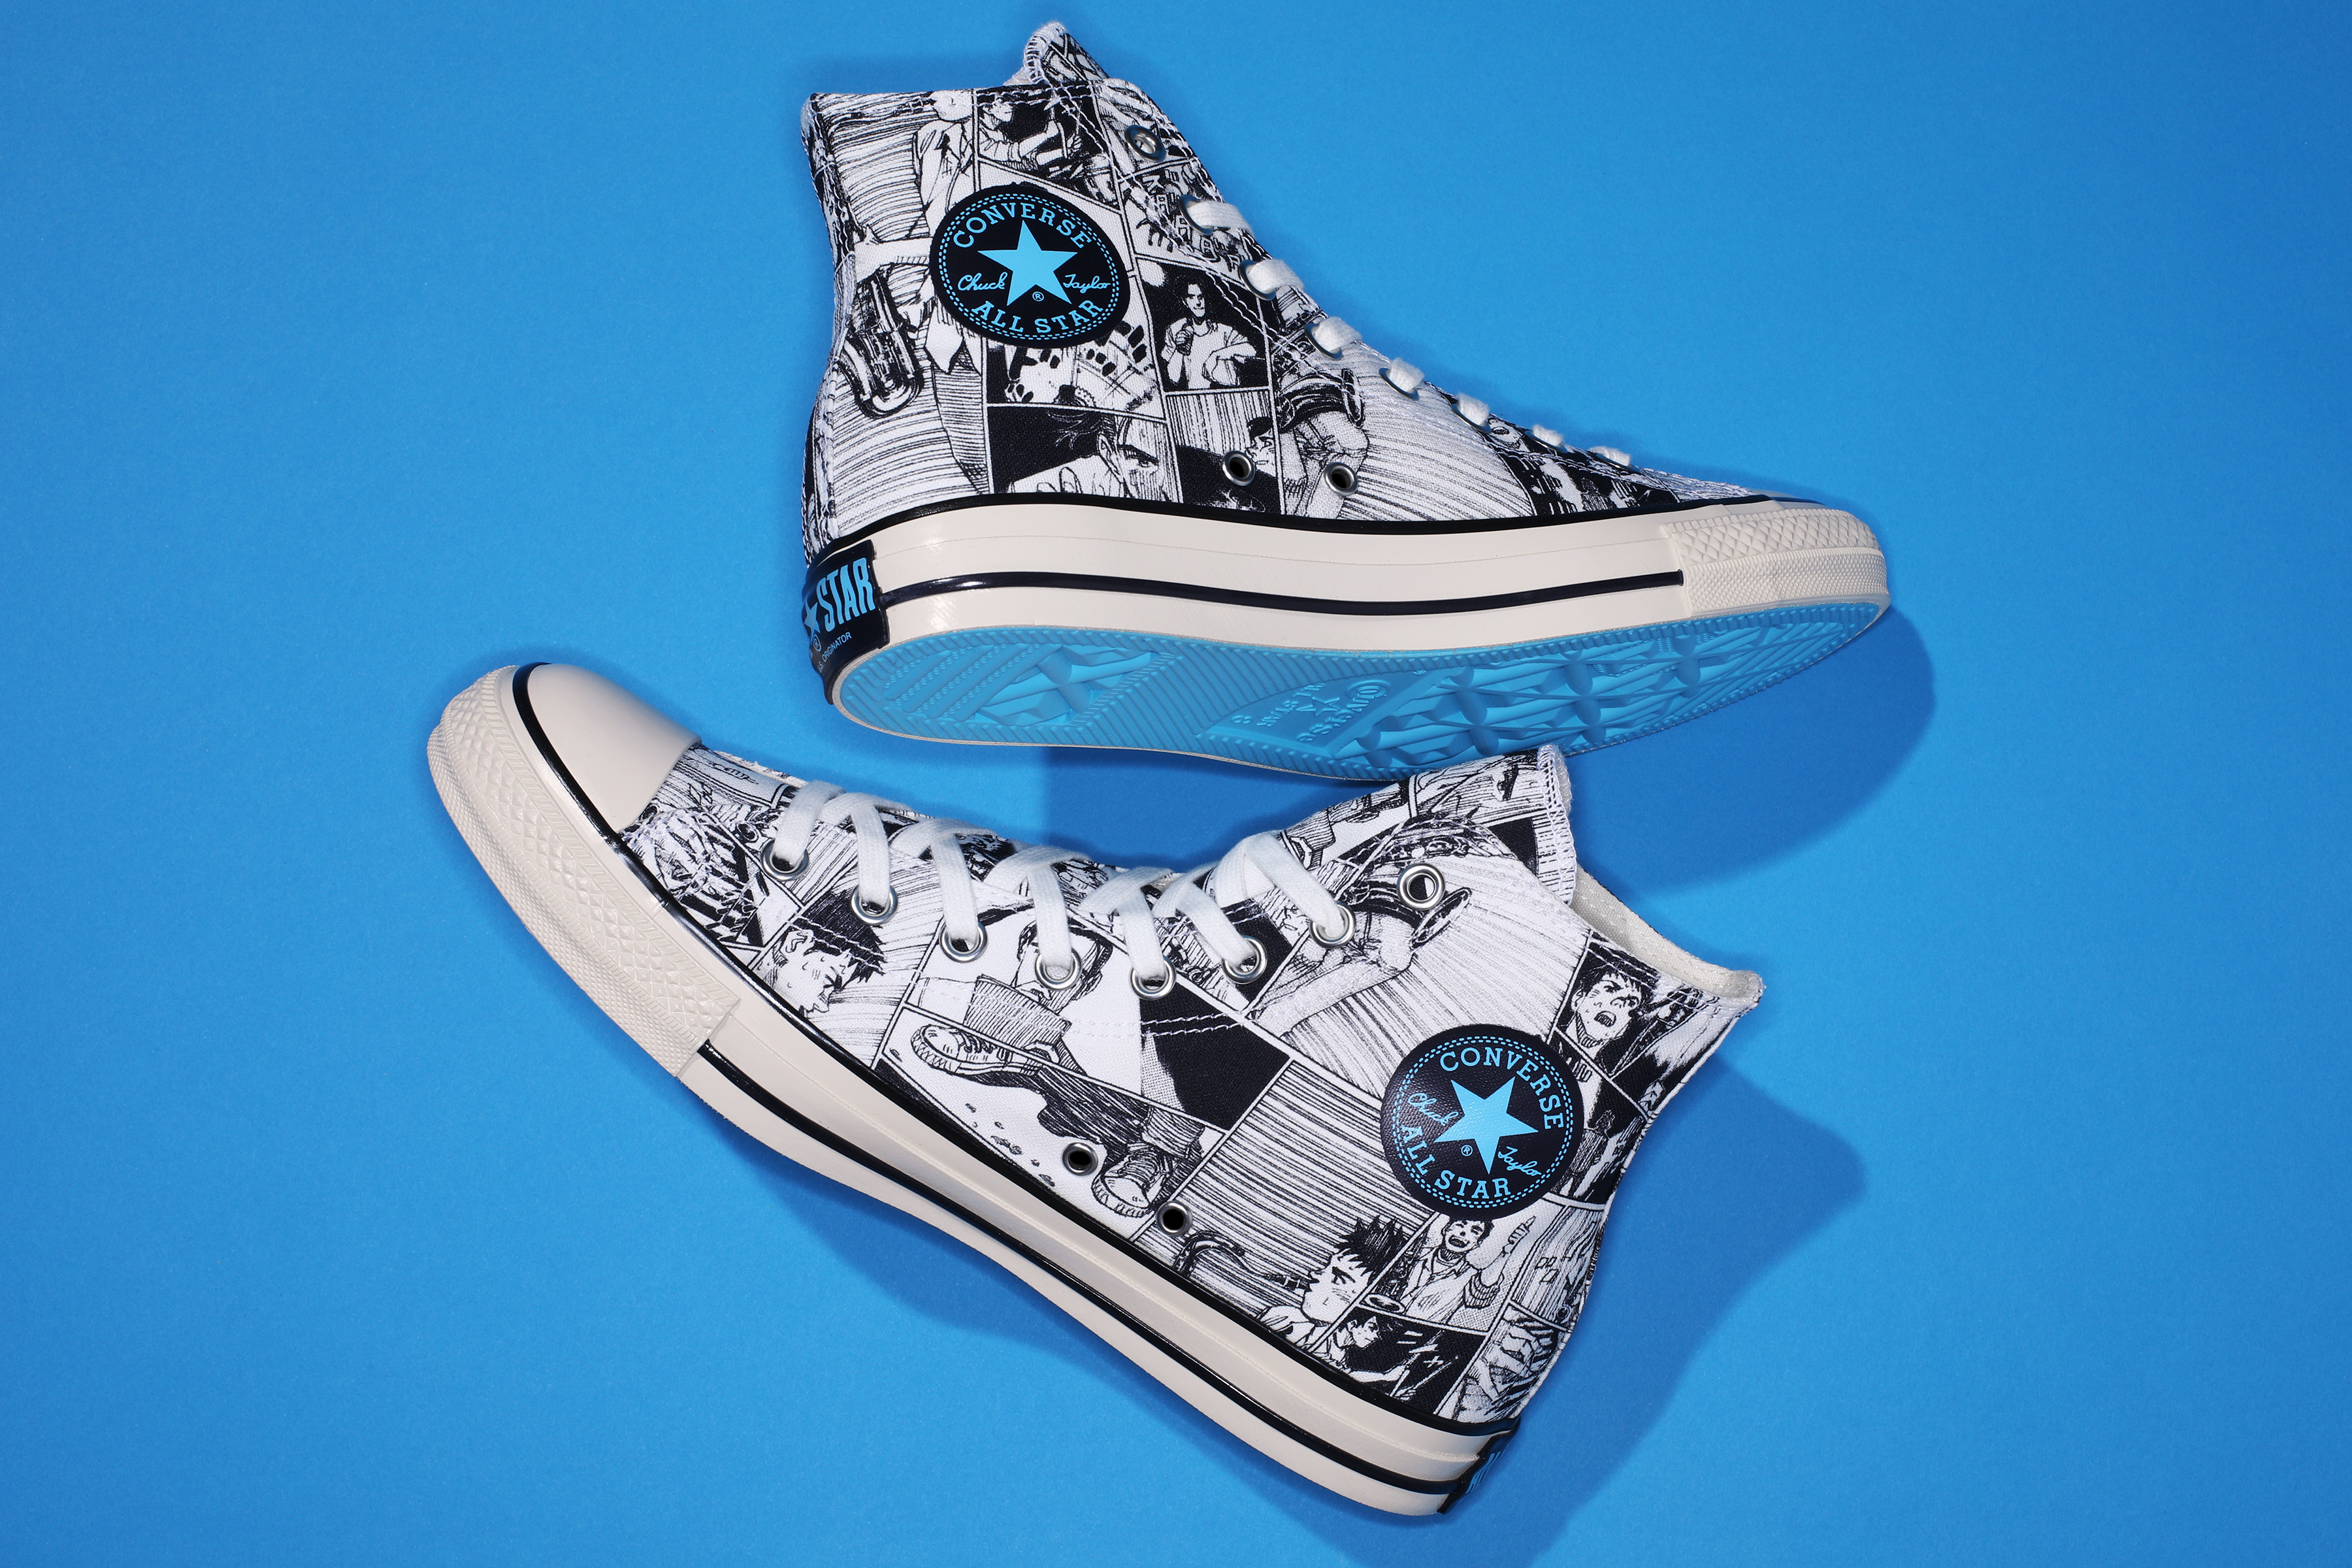 『BLUE GIANT』×CONVERSE ALL STAR　コラボレーション・モデル